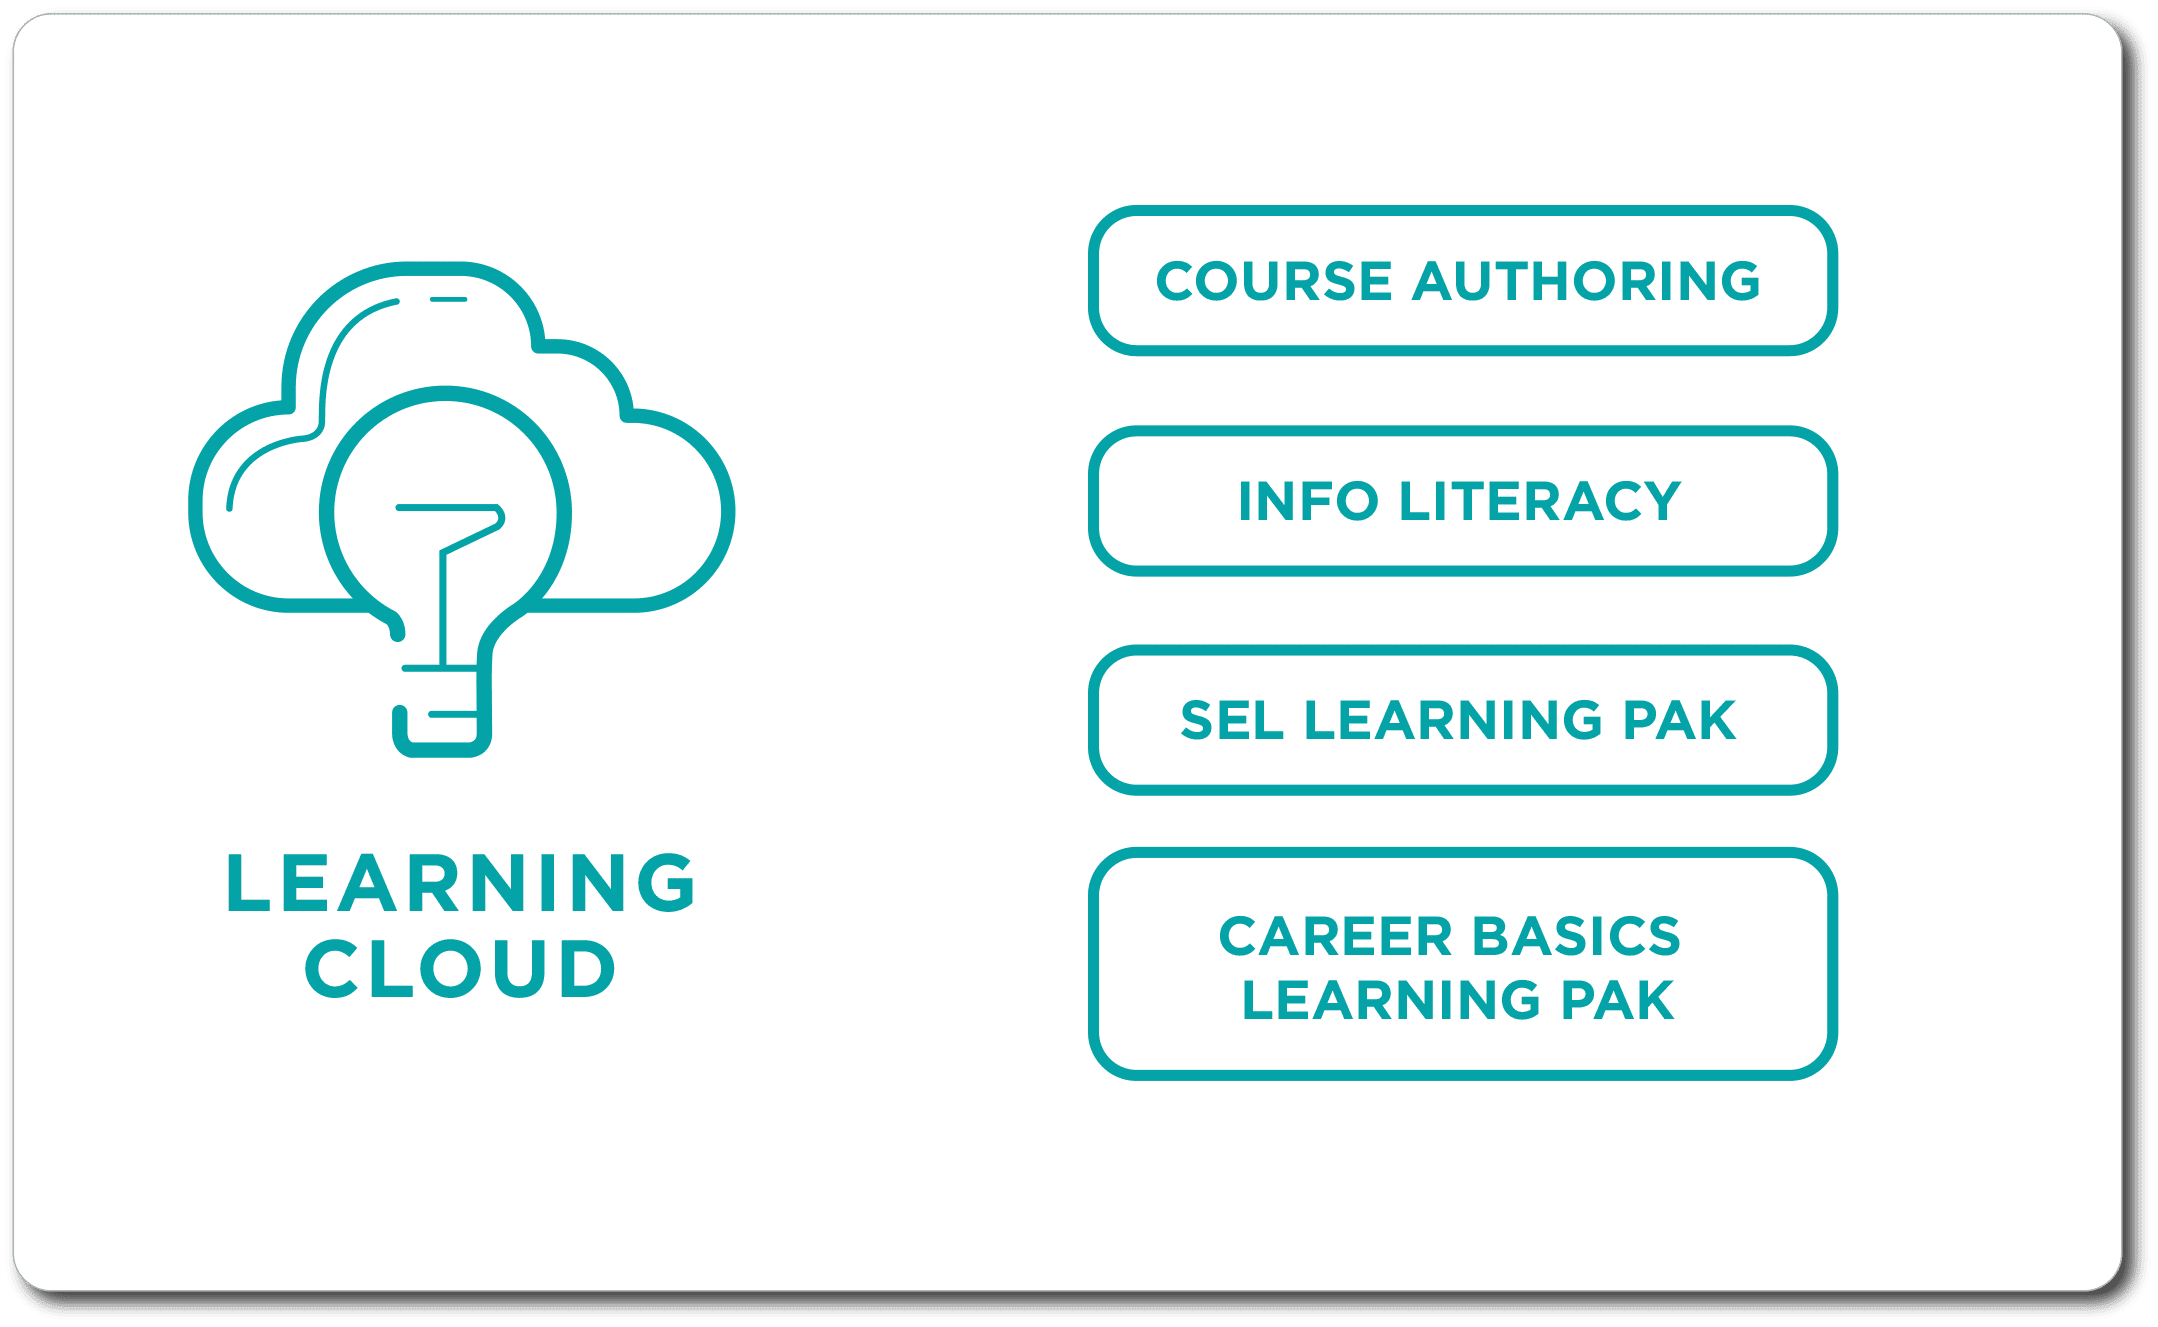 Learning Cloud package includes course authoring, info literacy, SEL learning pak and career basics learning pak